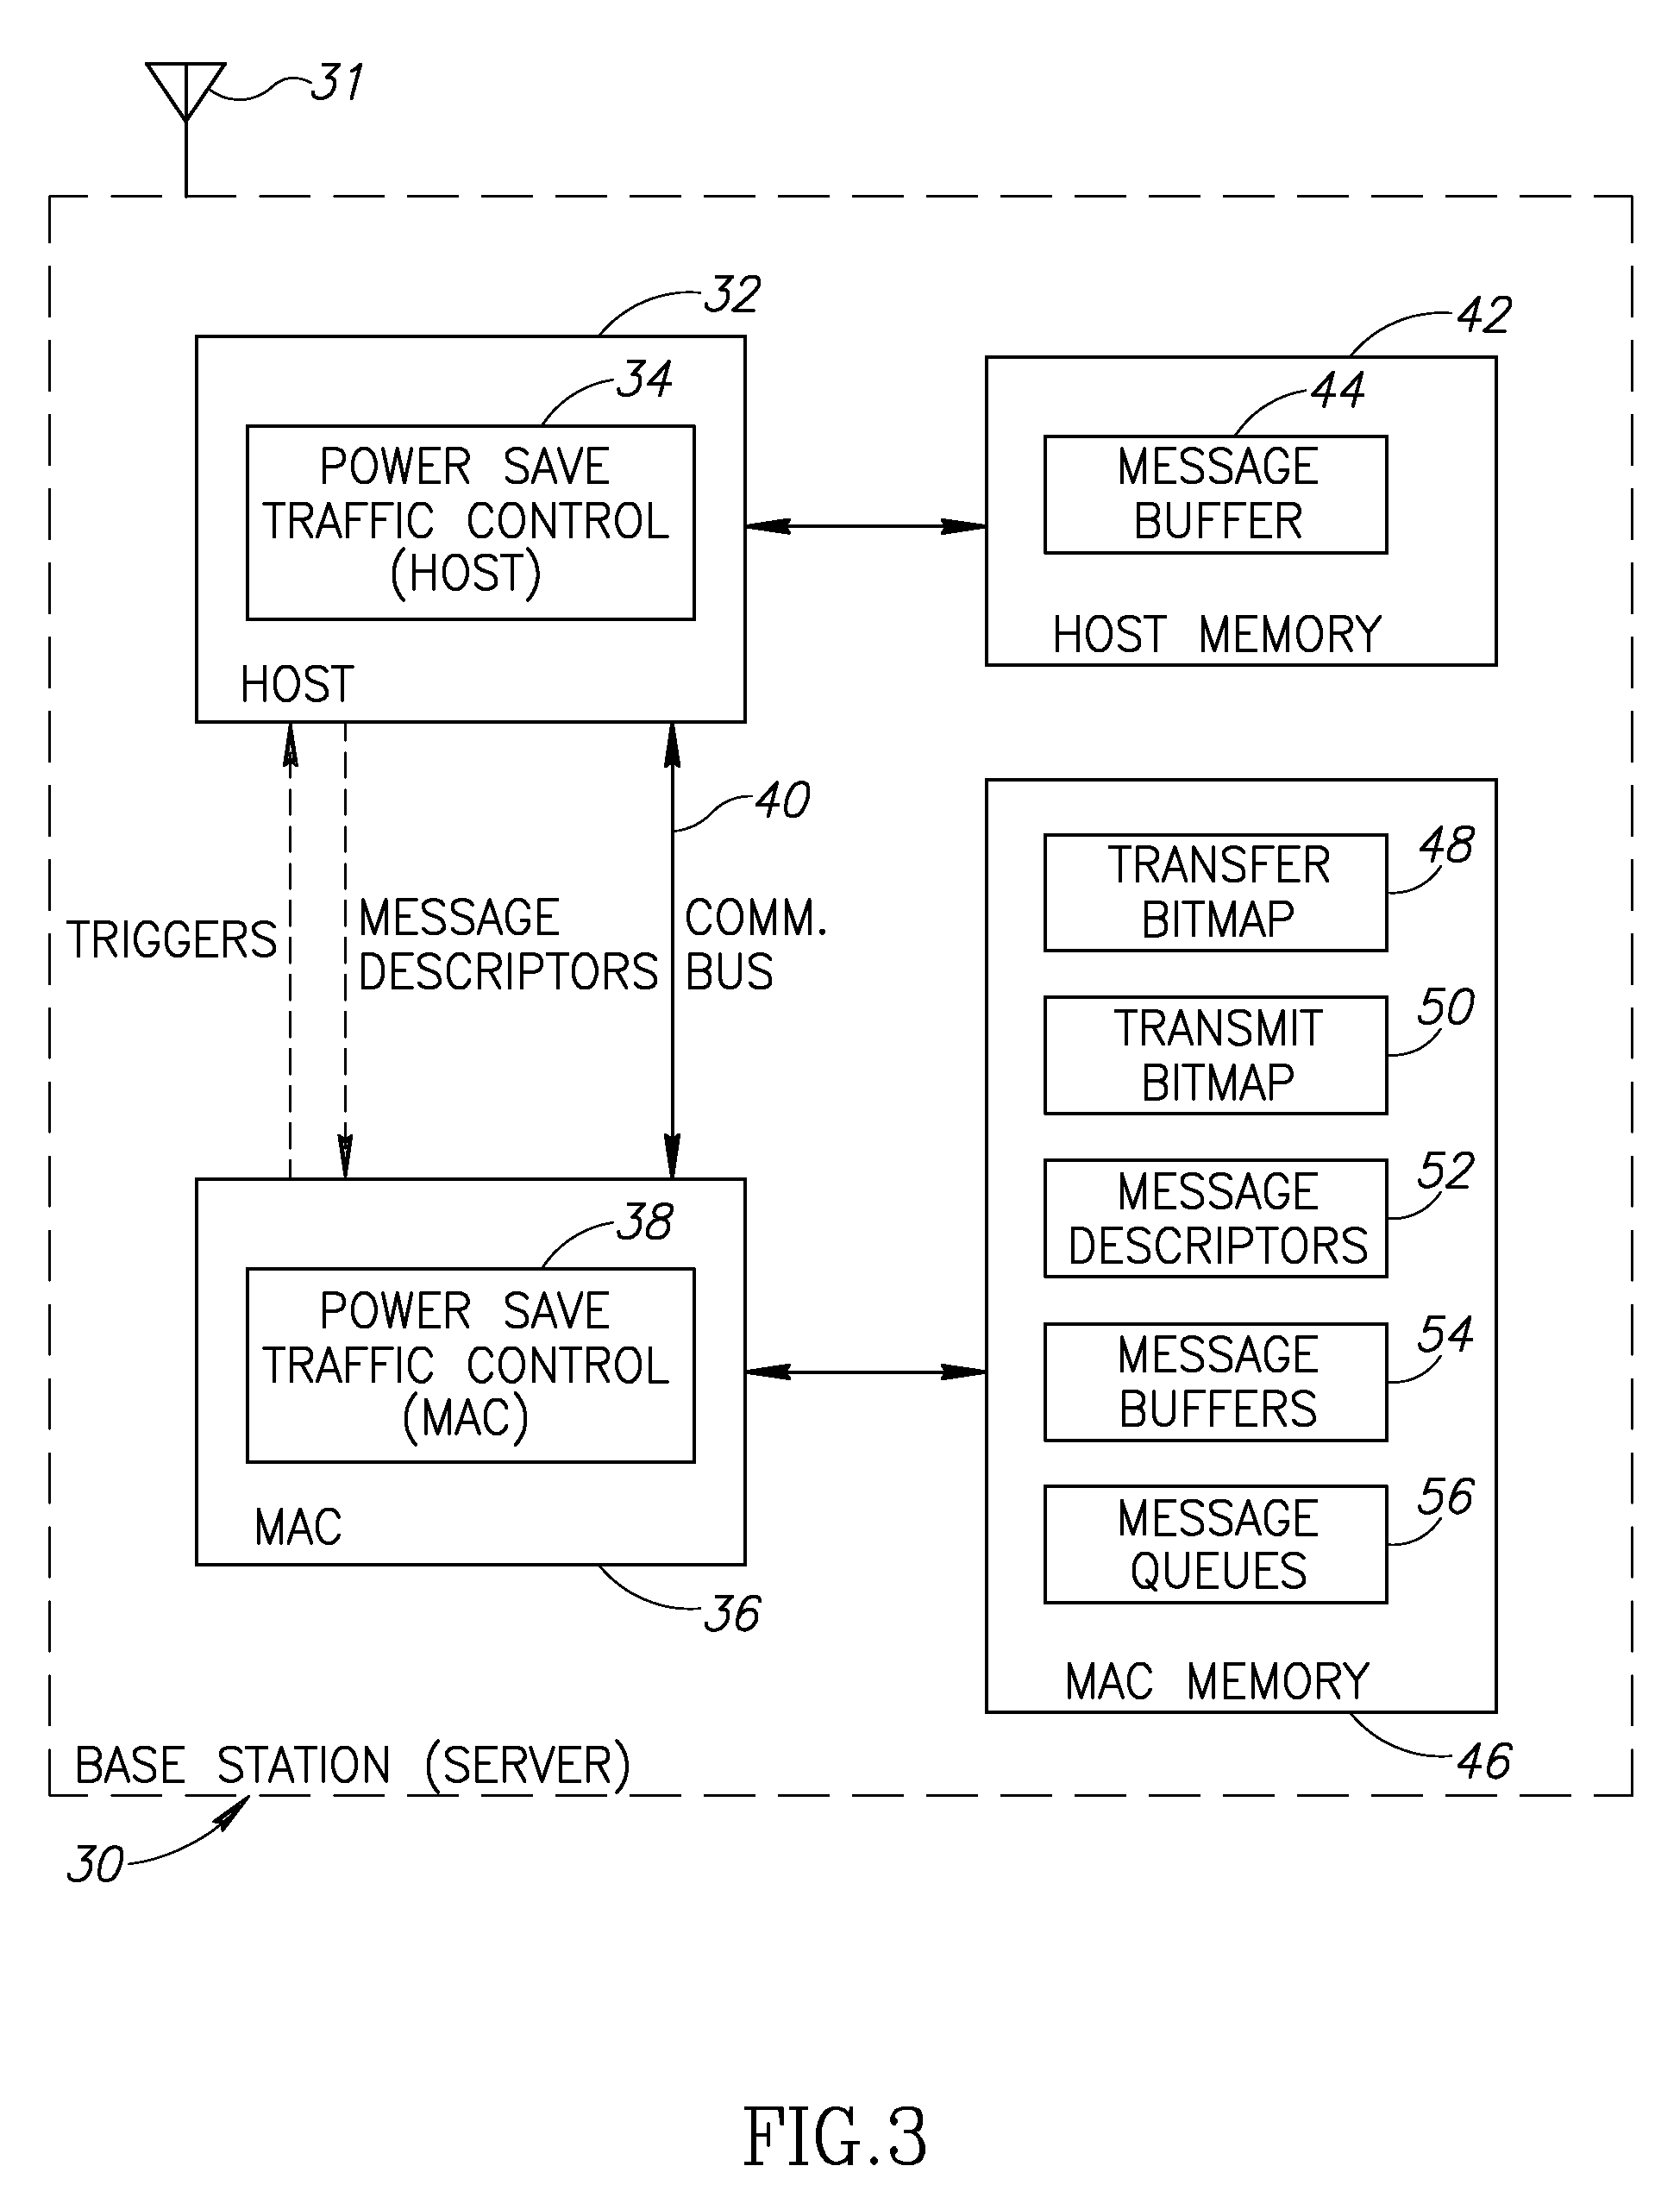 Apparatus for and method of power save traffic control in client/server networks